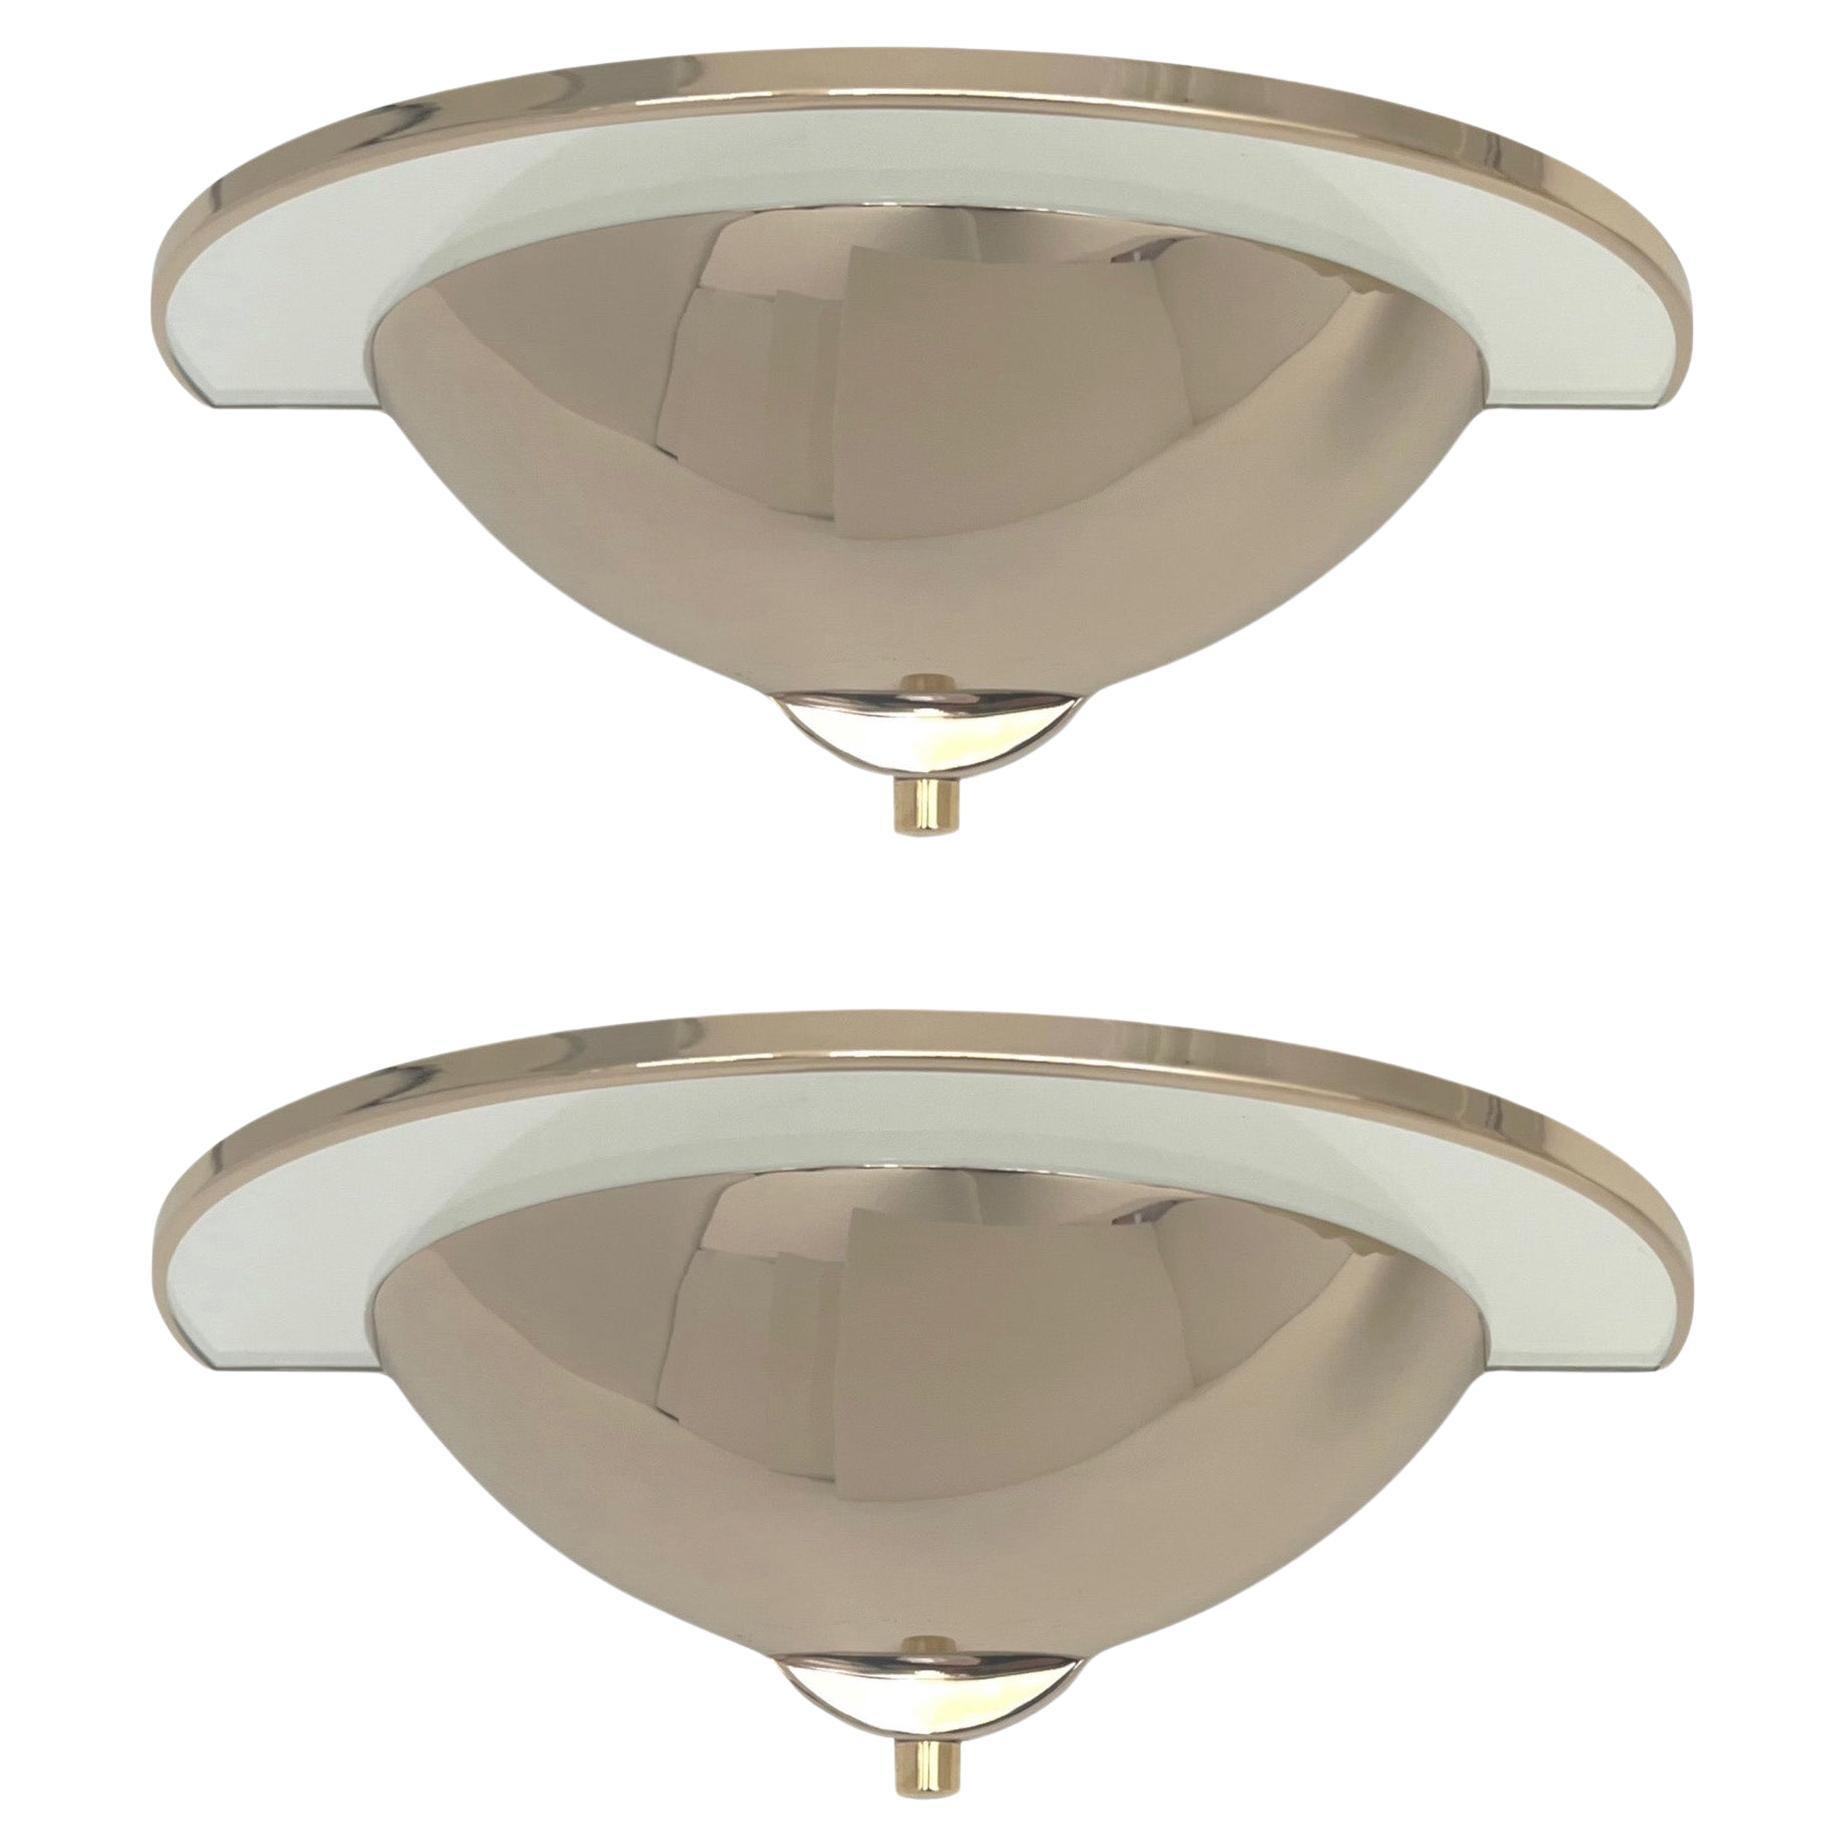 Postmodern Dimmable Gold Pair of Wall Sconces by Estiluz, Barcelona, 1980s